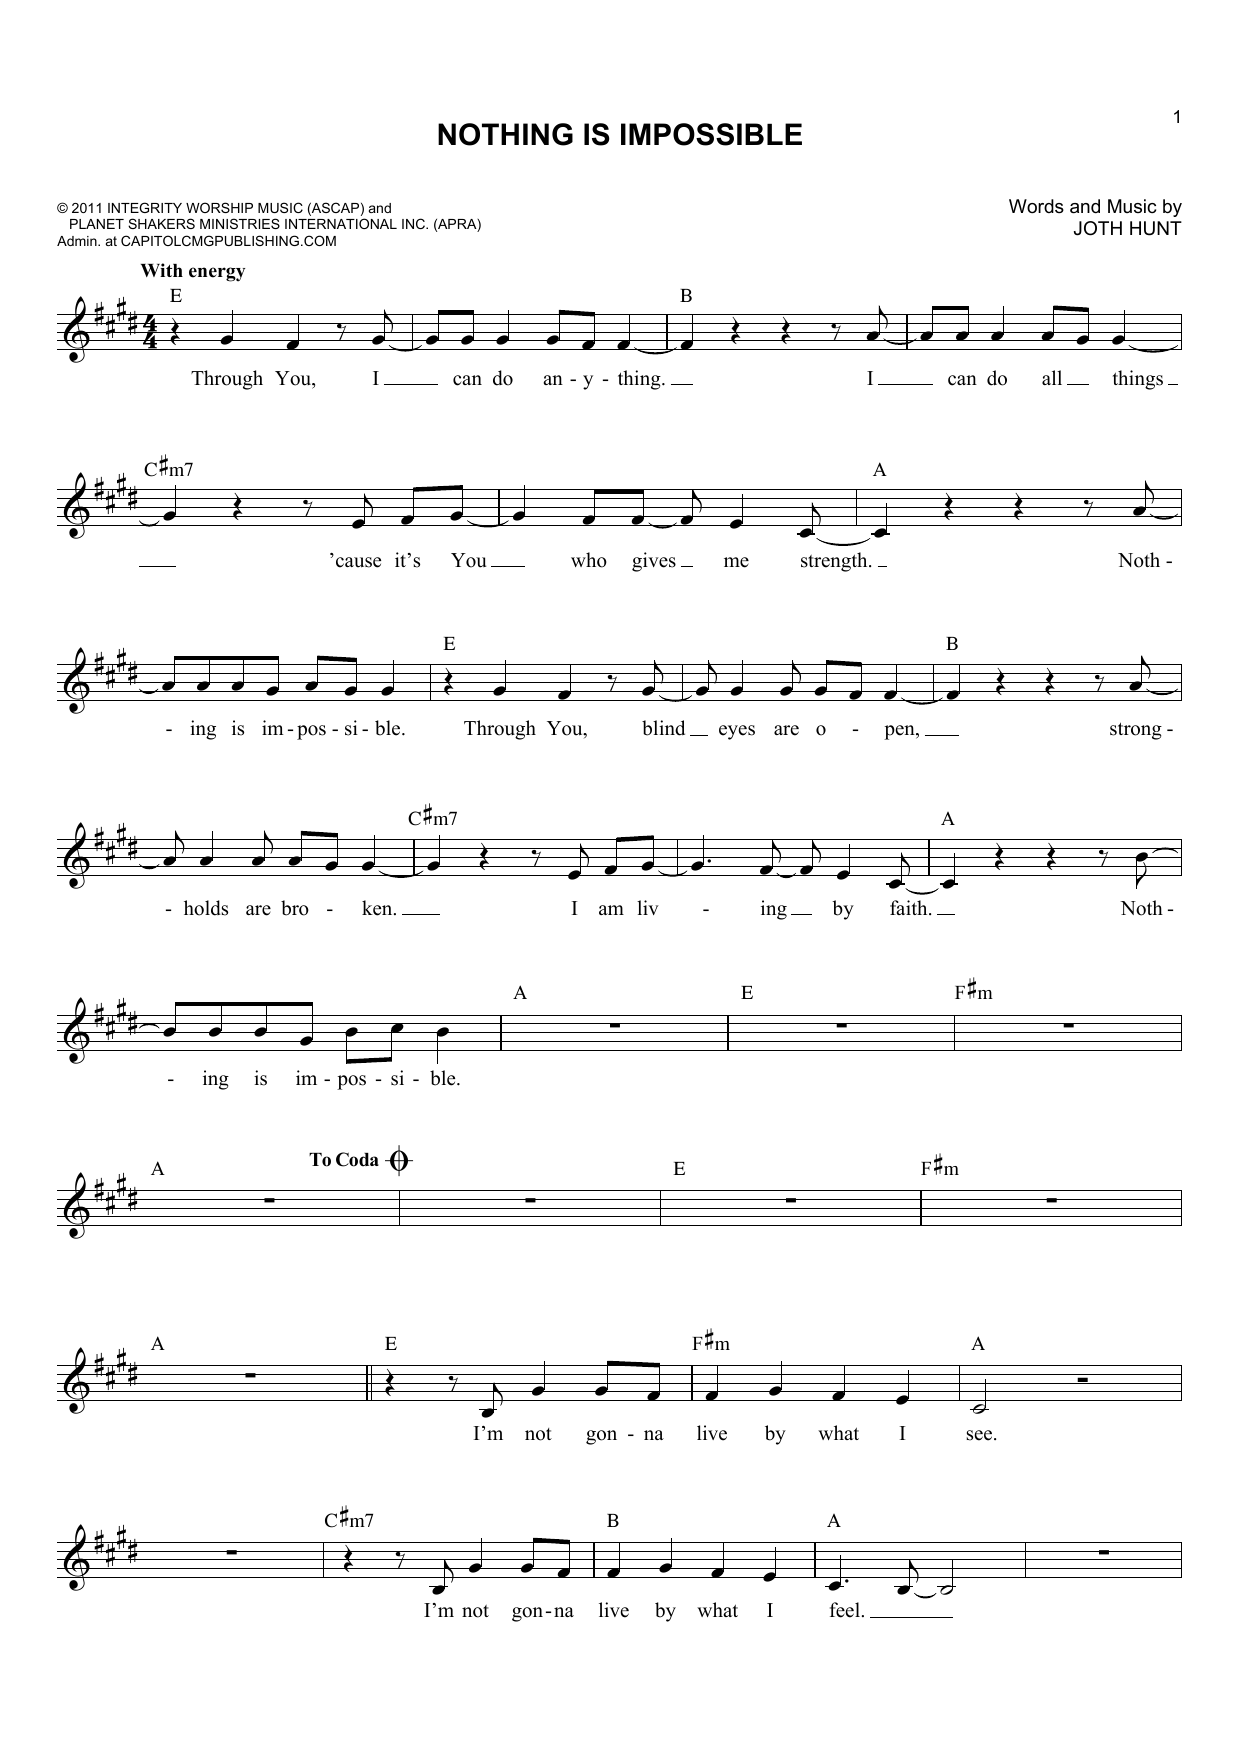 Download Joth Hunt Nothing Is Impossible Sheet Music